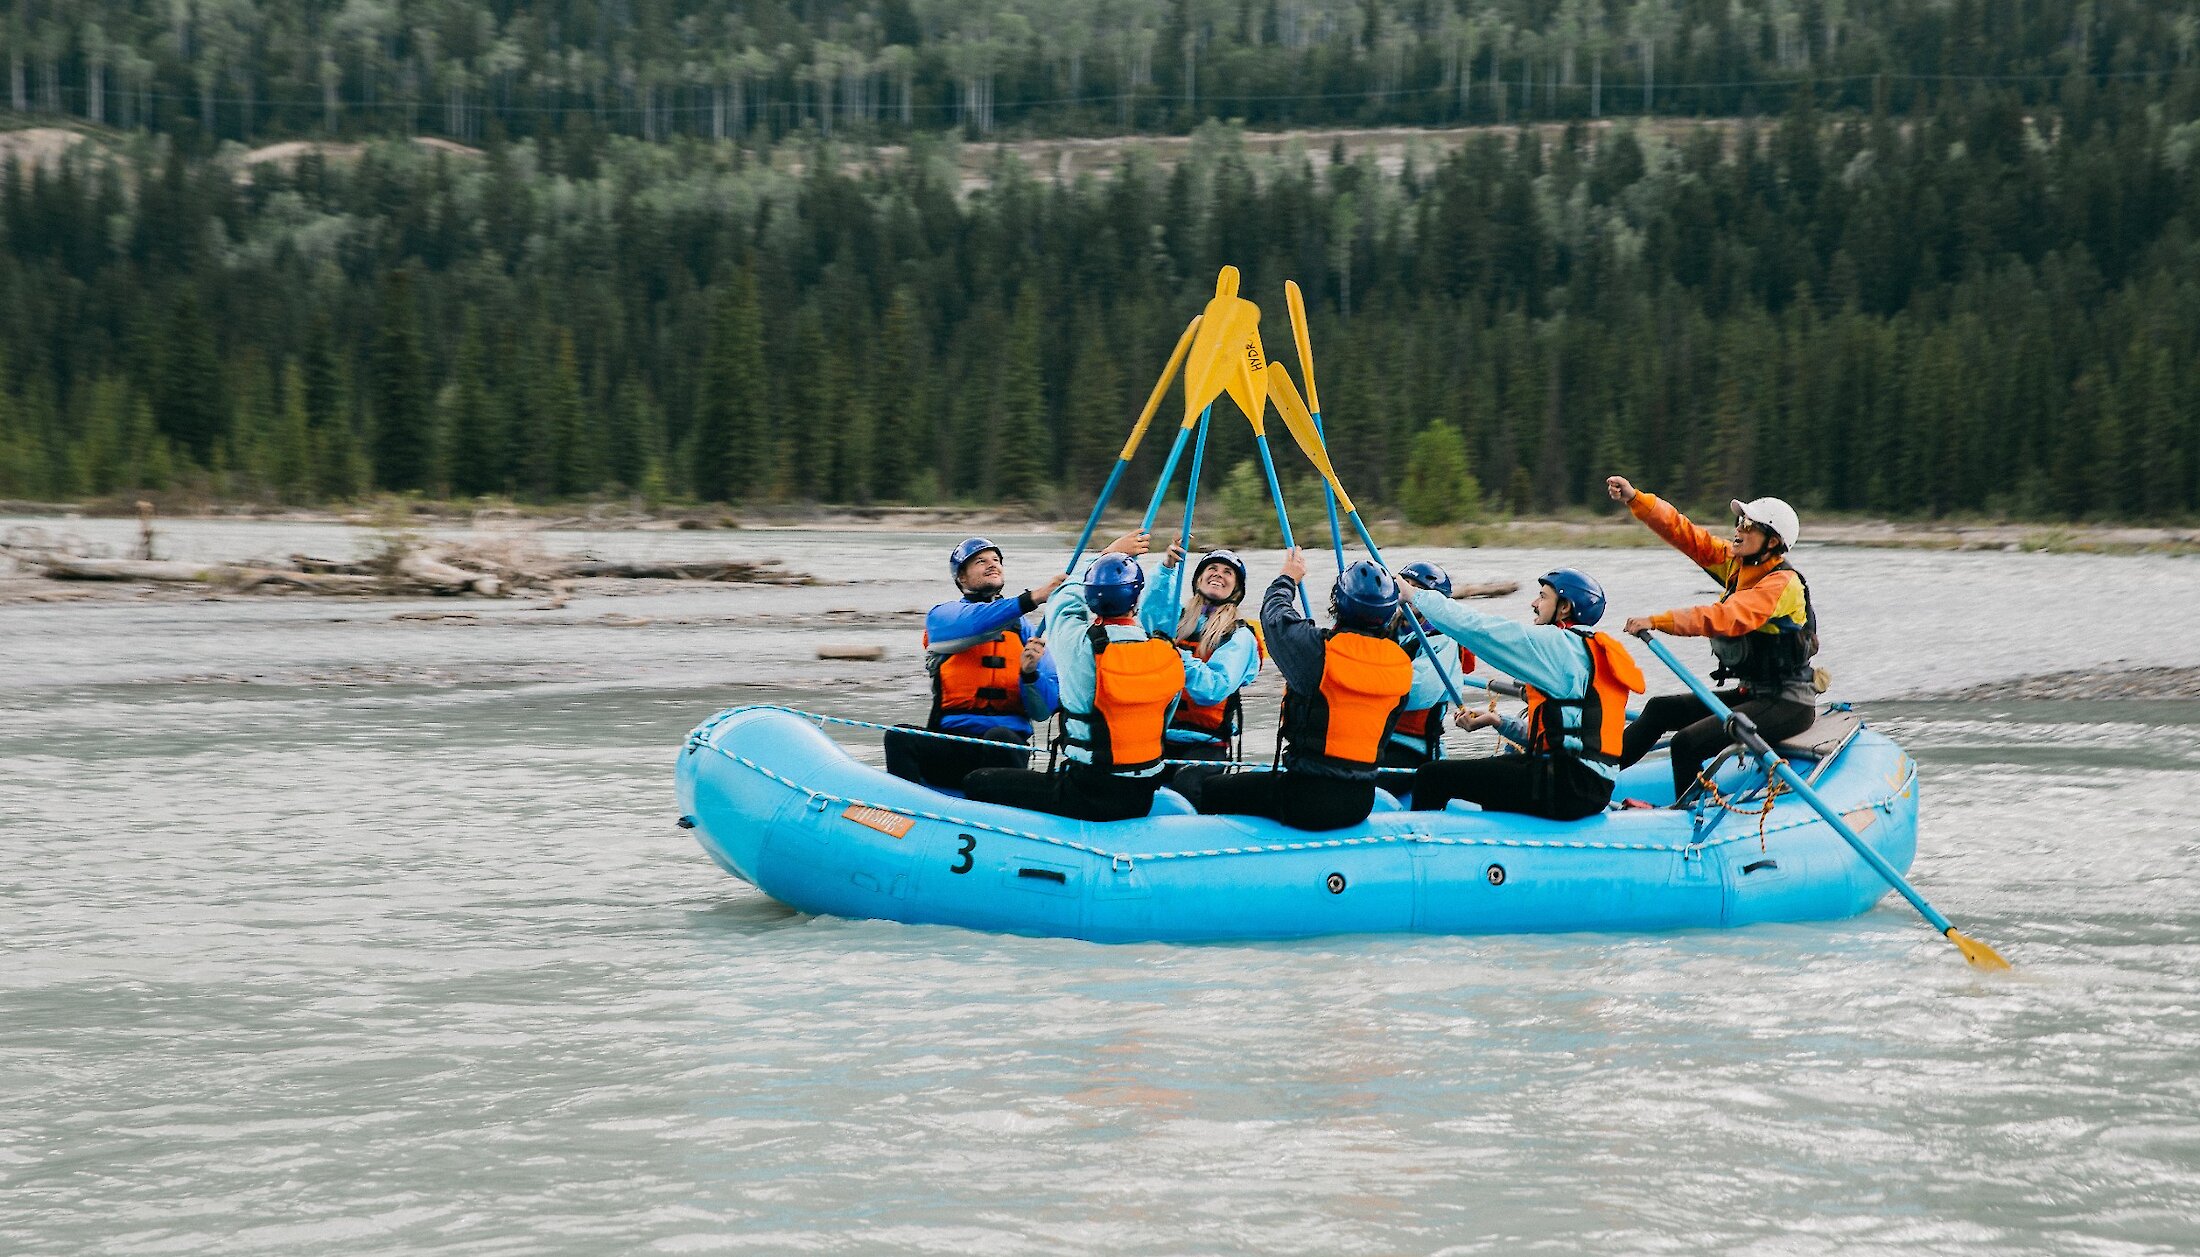 Rafters getting ready to hit the rapids on the Kicking Horse